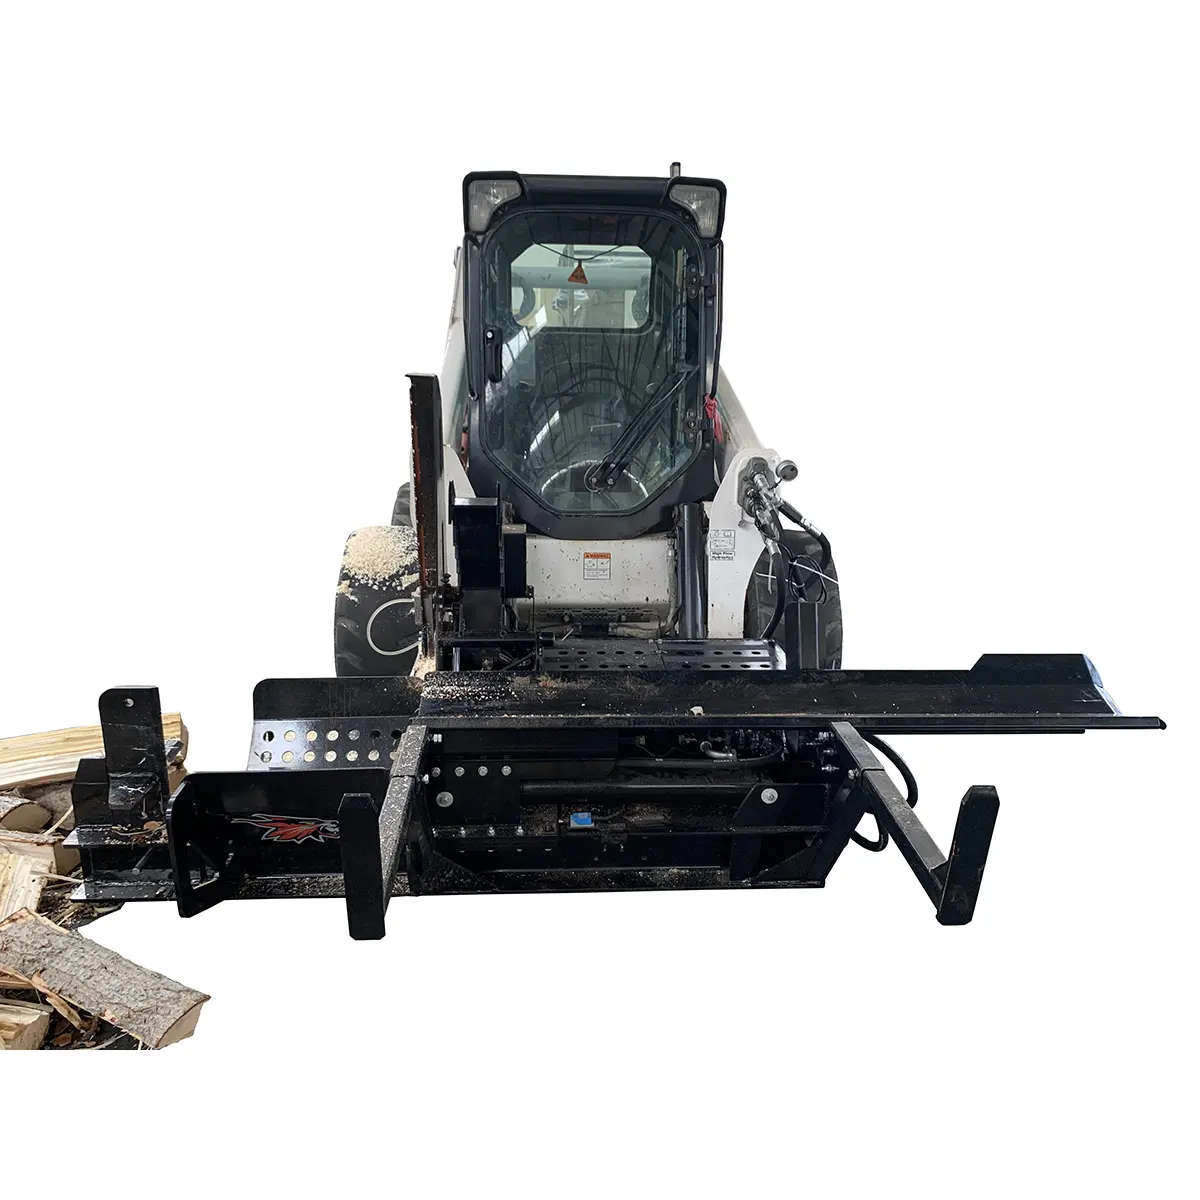 Excavator firewood processor with saw and splitting